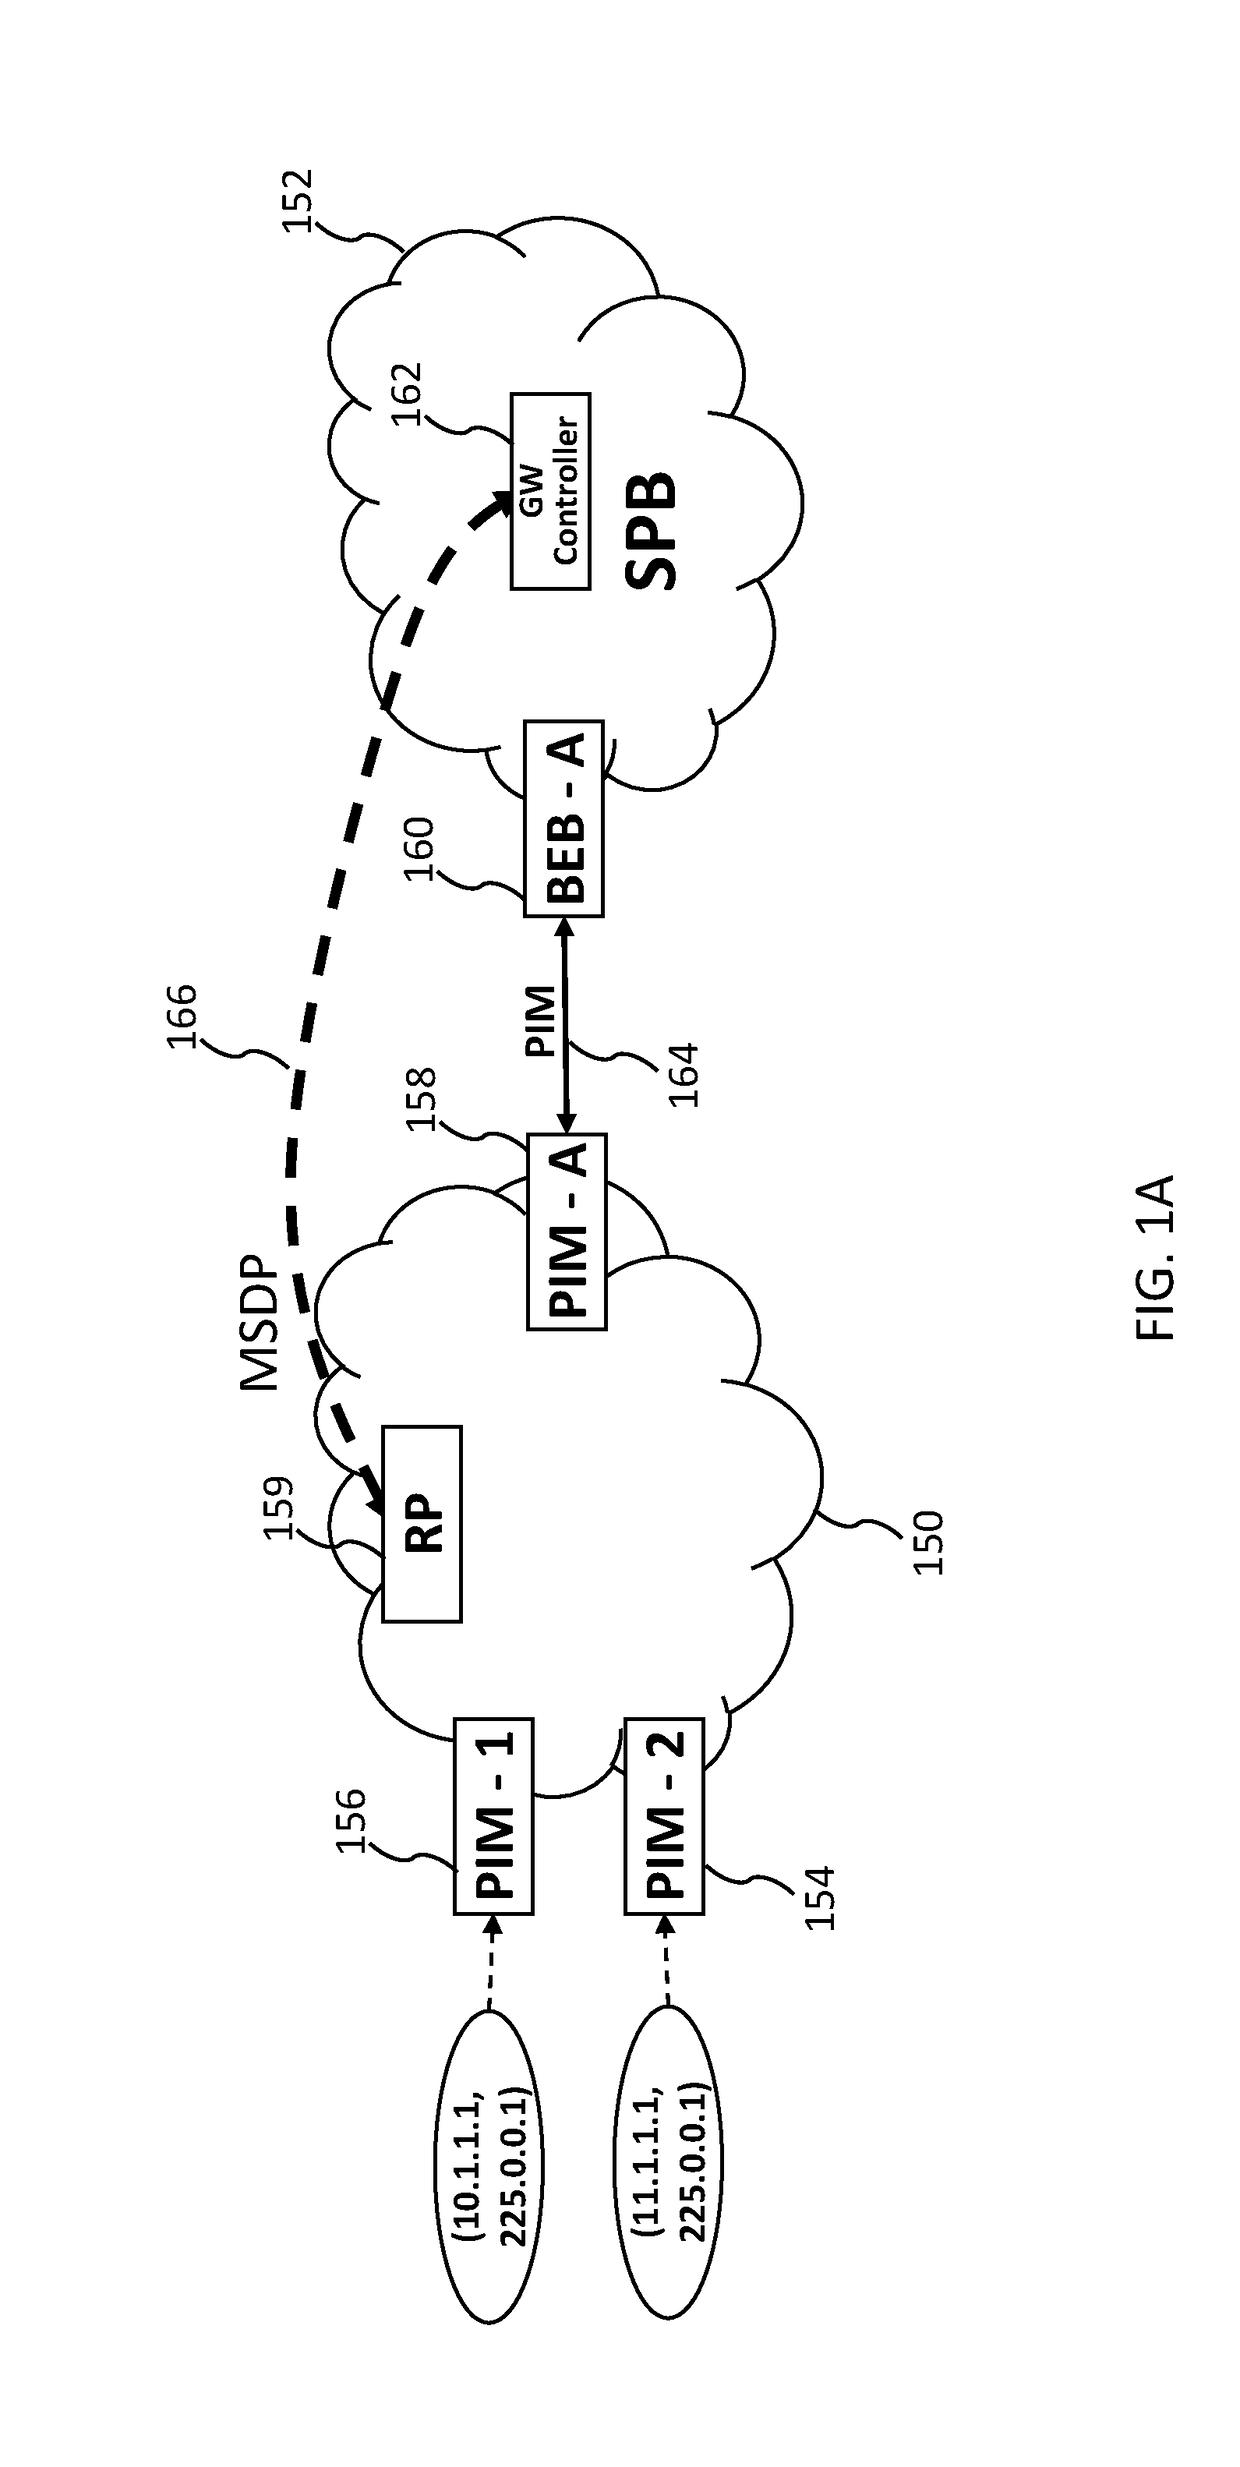 Ingress gateway selection for a shortest path bridging network to support inter domain multicast routing